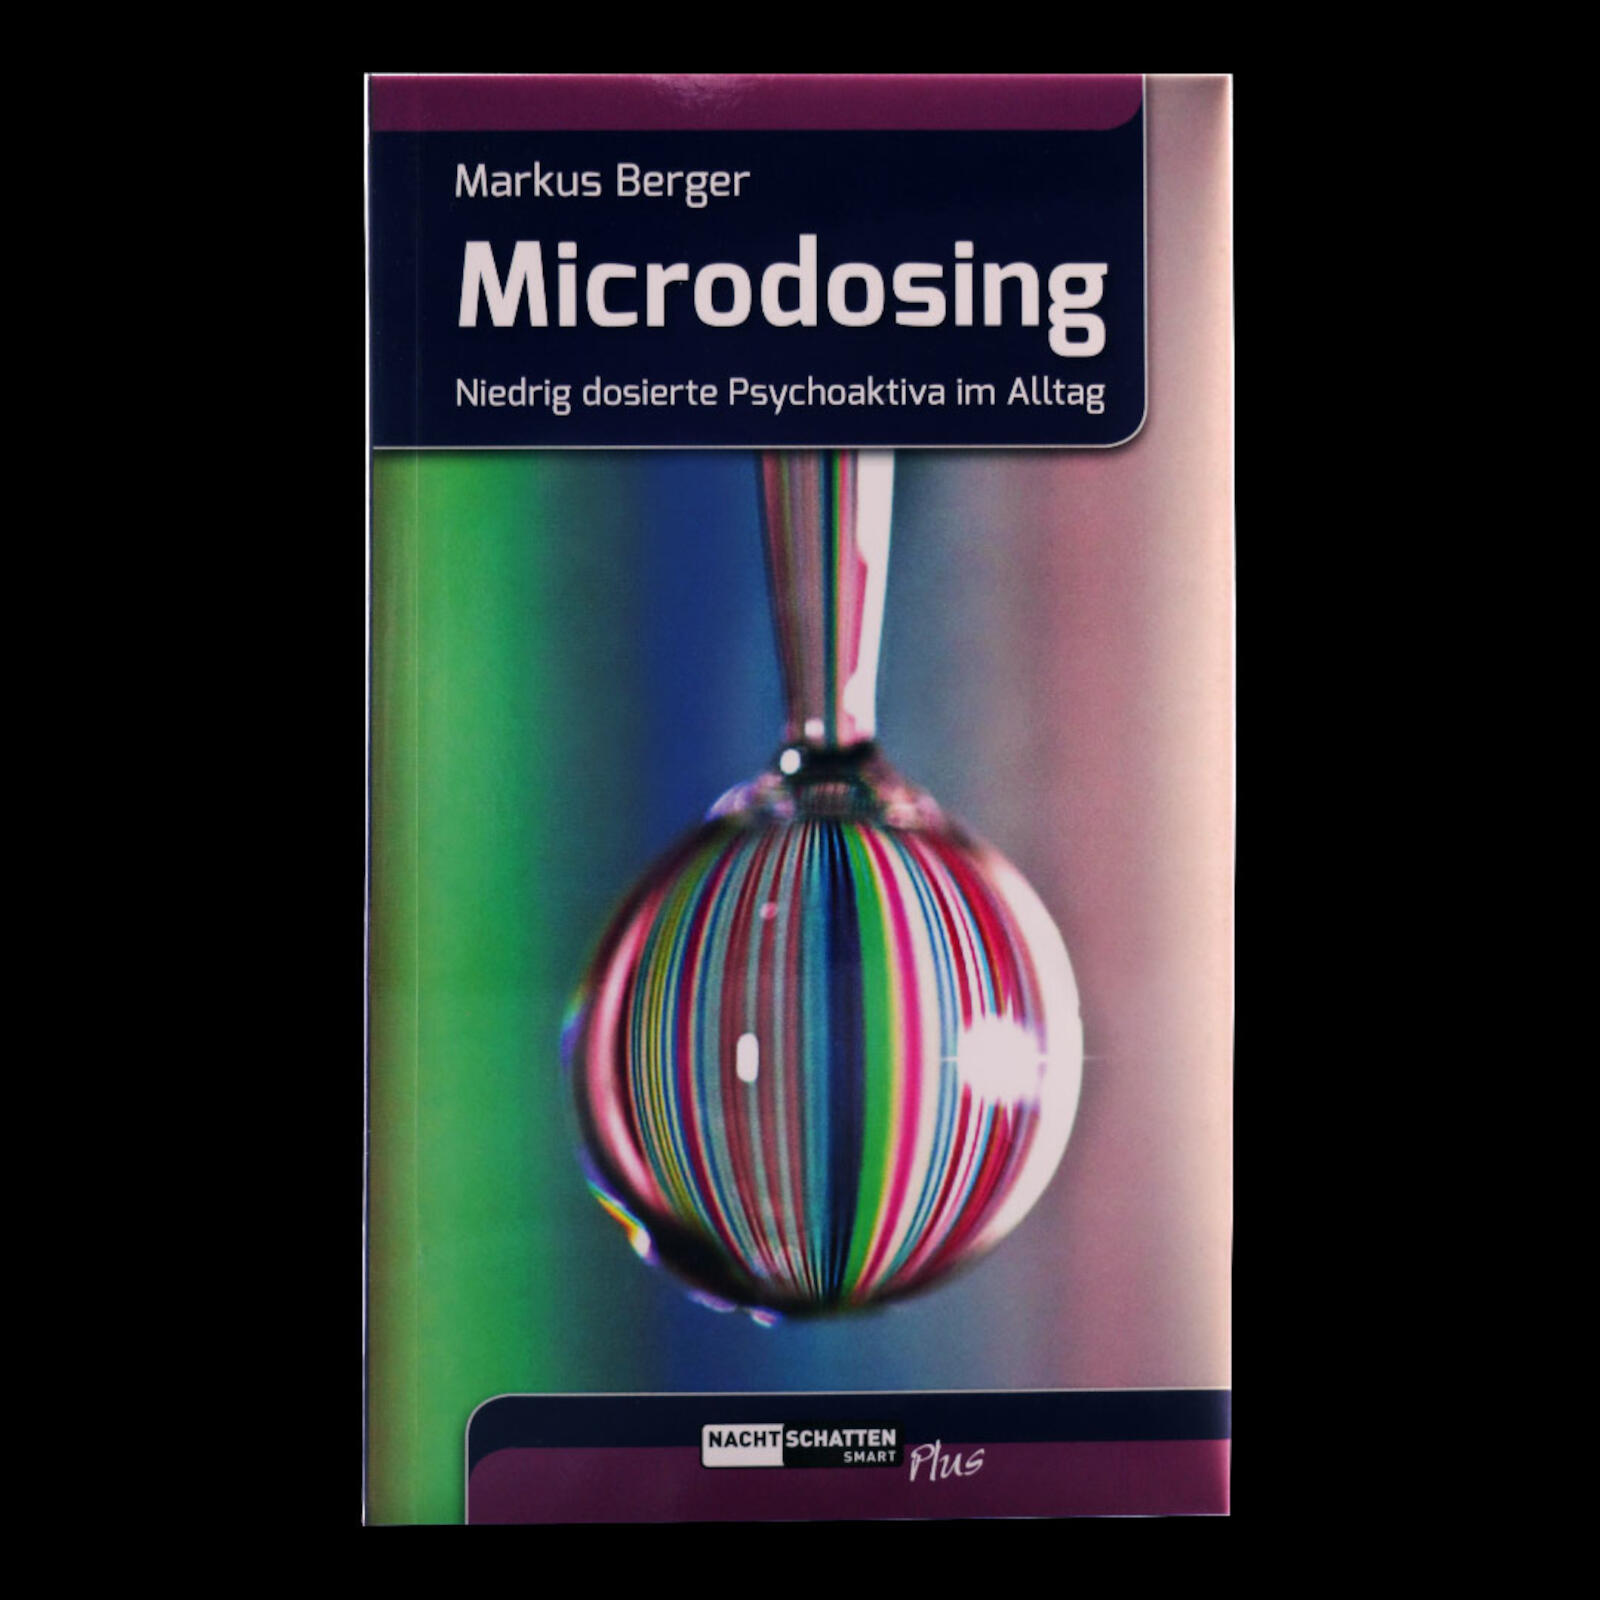 Microdosing - Low-Dose Psychoactives in everyday life